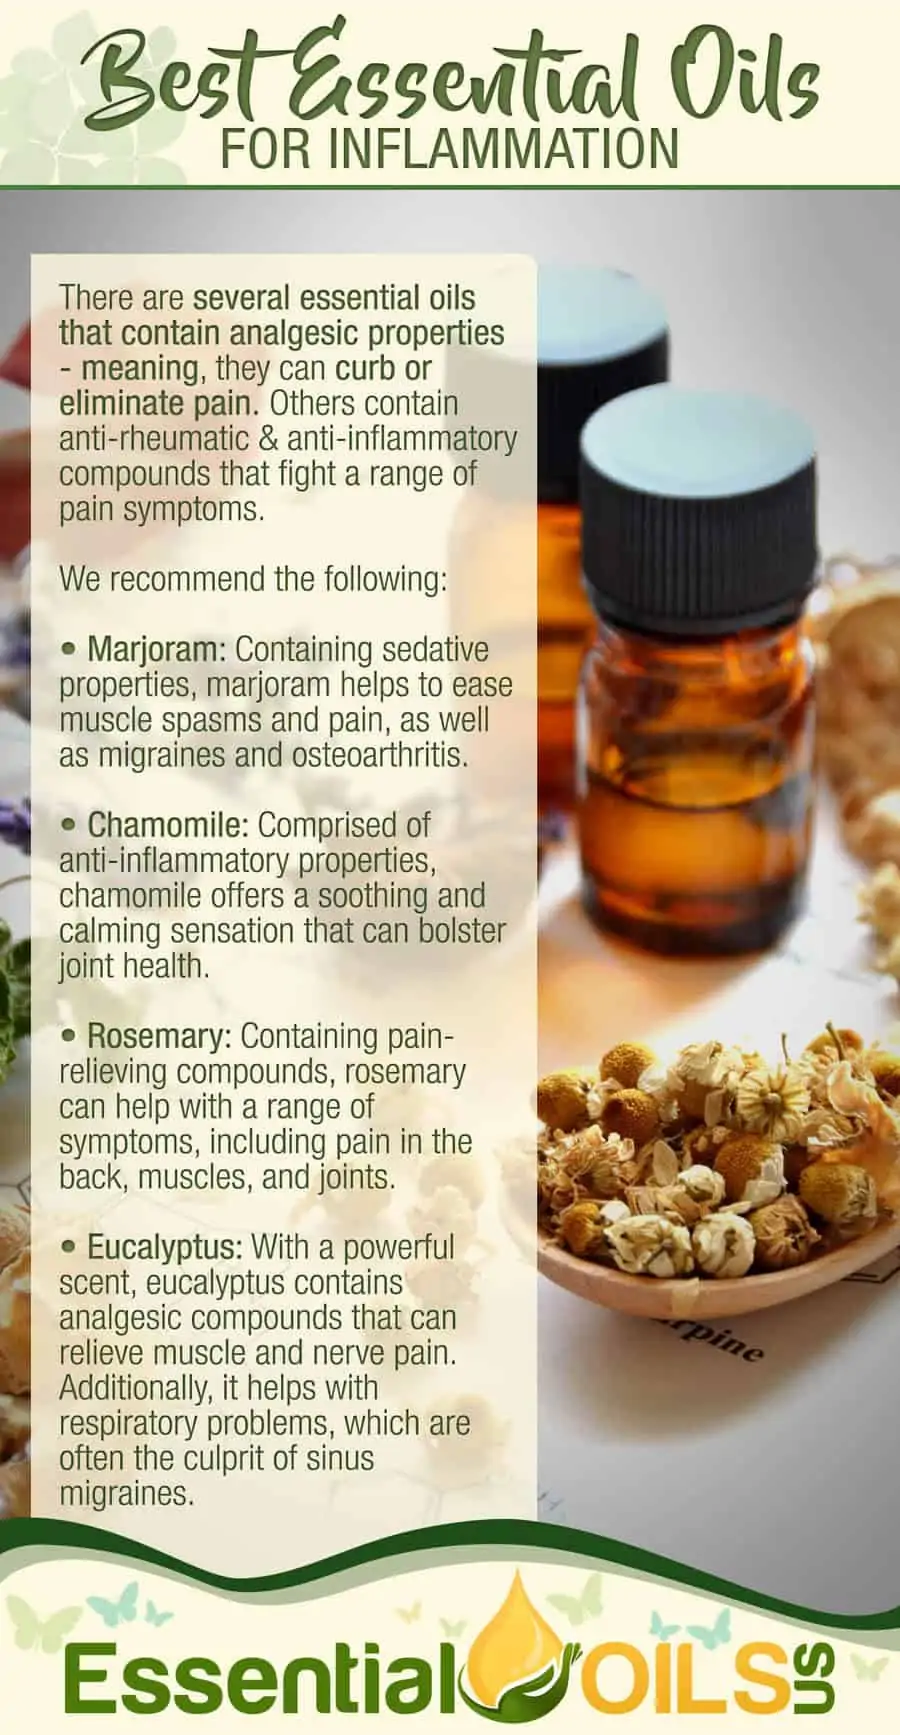 Best Essential Oils For Inflammation